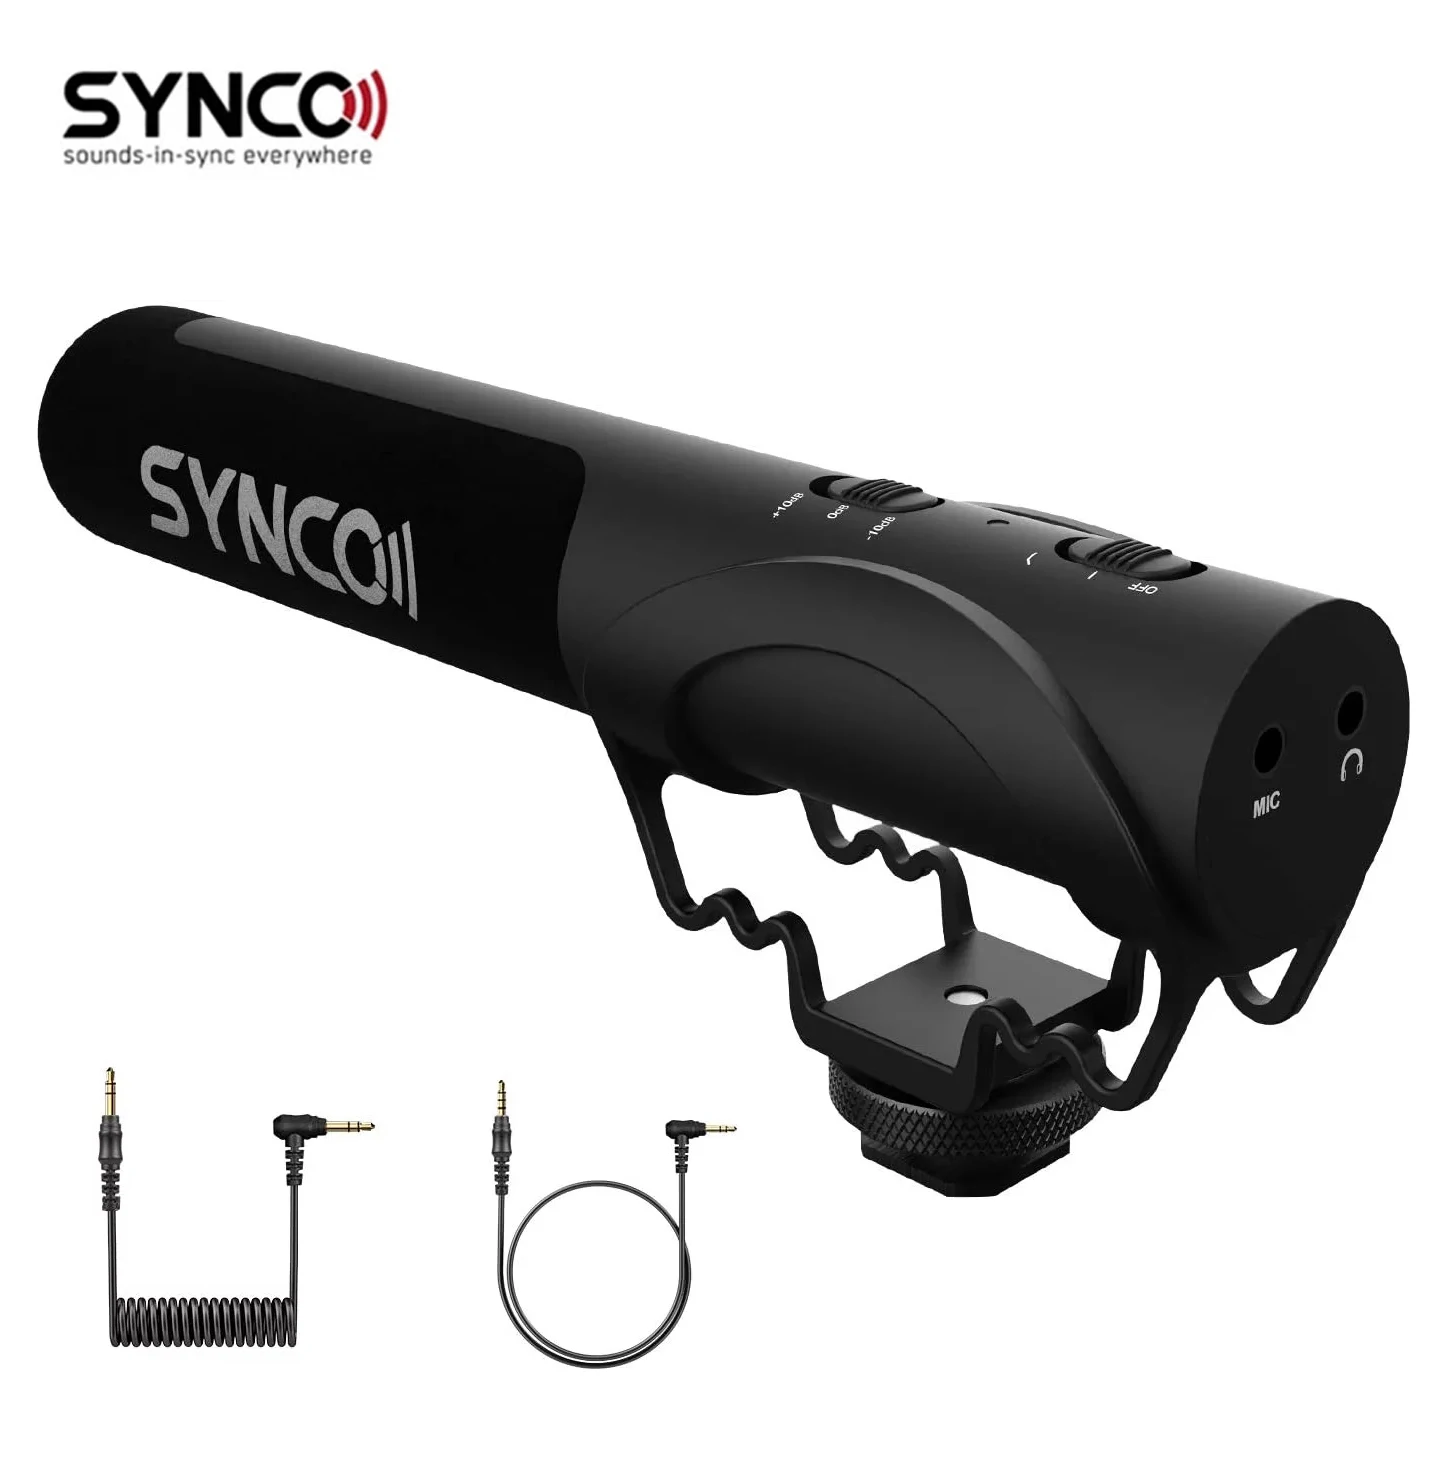 

SYNCO Mic-M3 On Camera Shotgun Mic Super-Cardioid Condenser Video Microphone with 3.5mm TRRS TRS Cables for Smartphone DSLR Cam